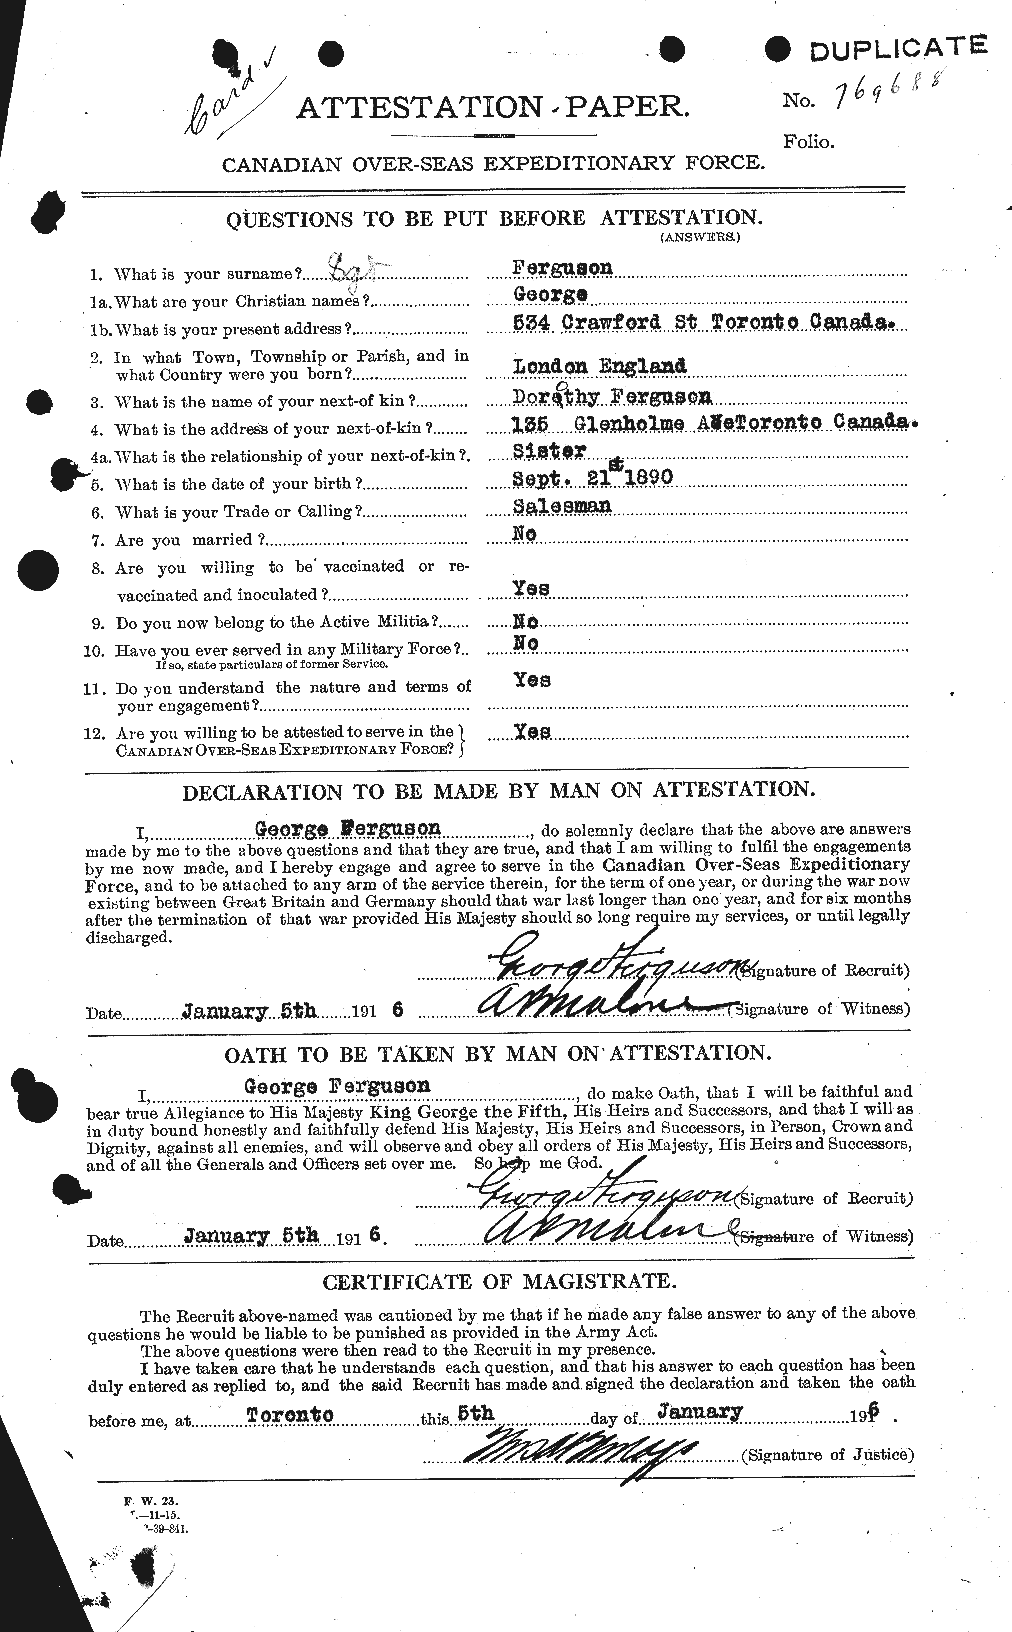 Personnel Records of the First World War - CEF 319091a